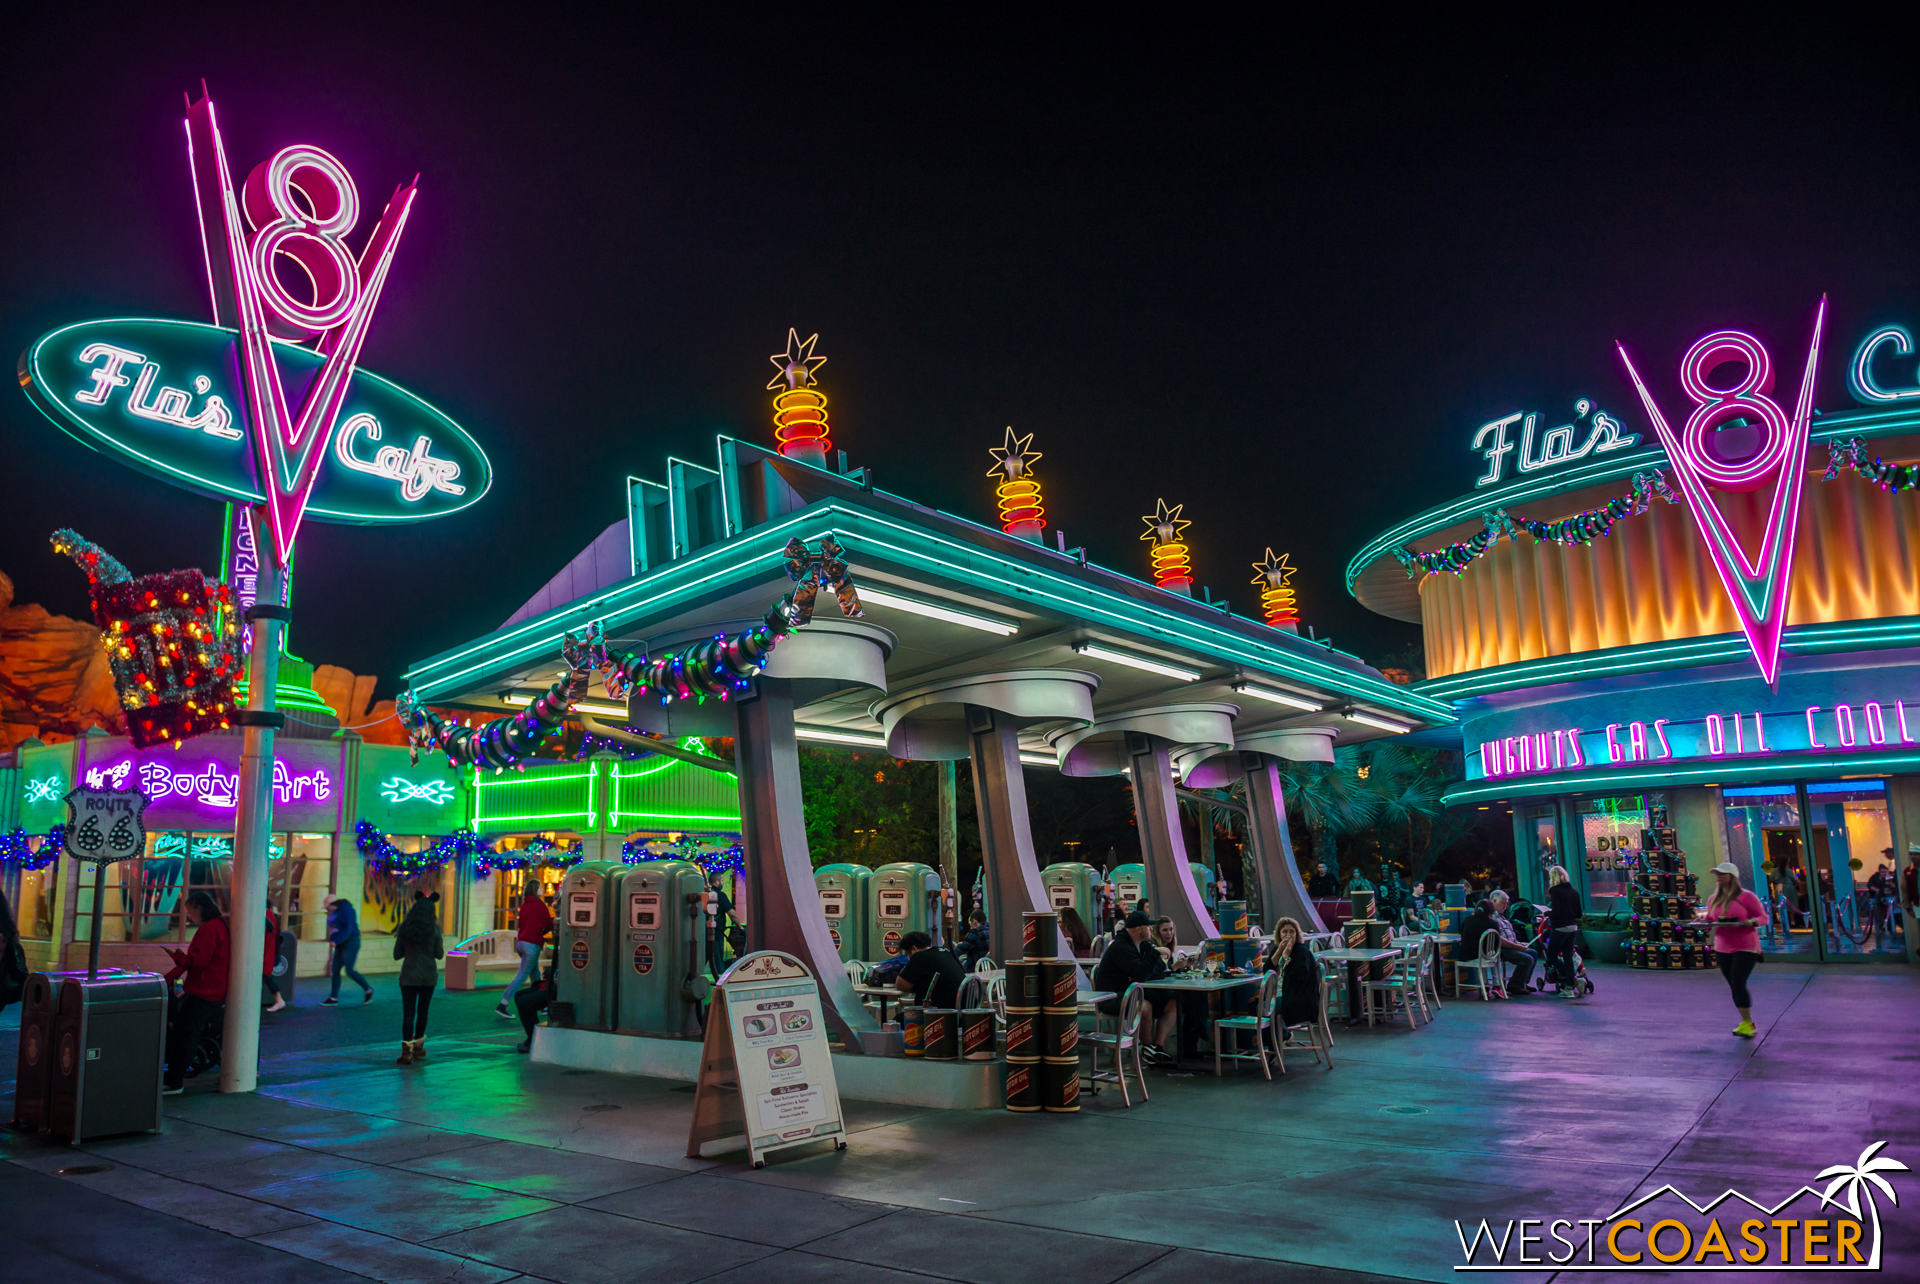  Flo's is lovely as well. 